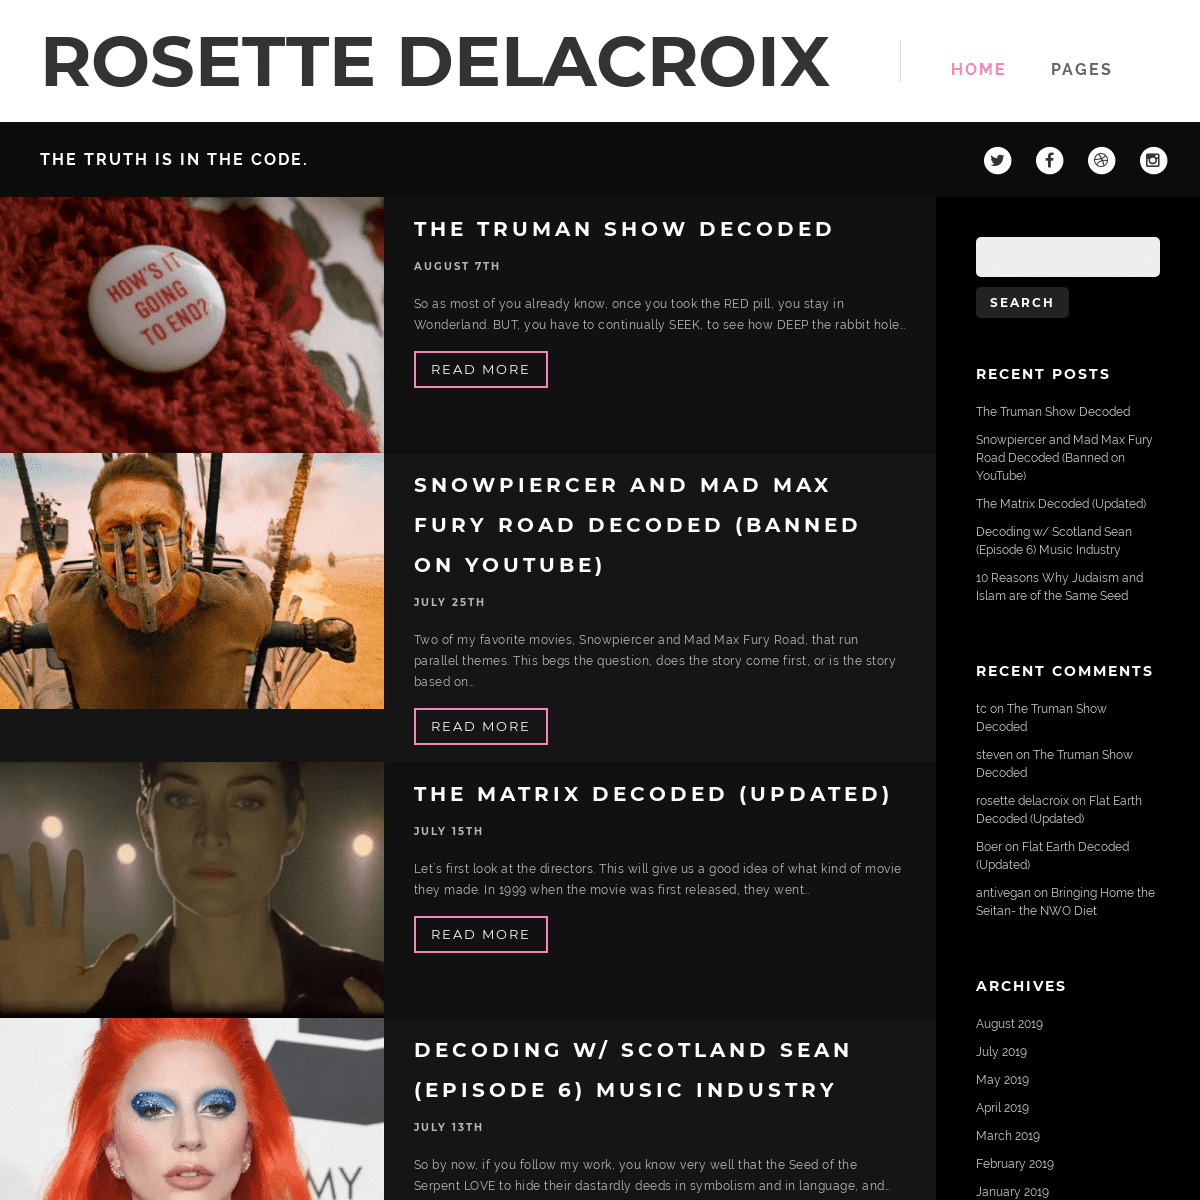 rosette delacroix – The Truth is in the Code.